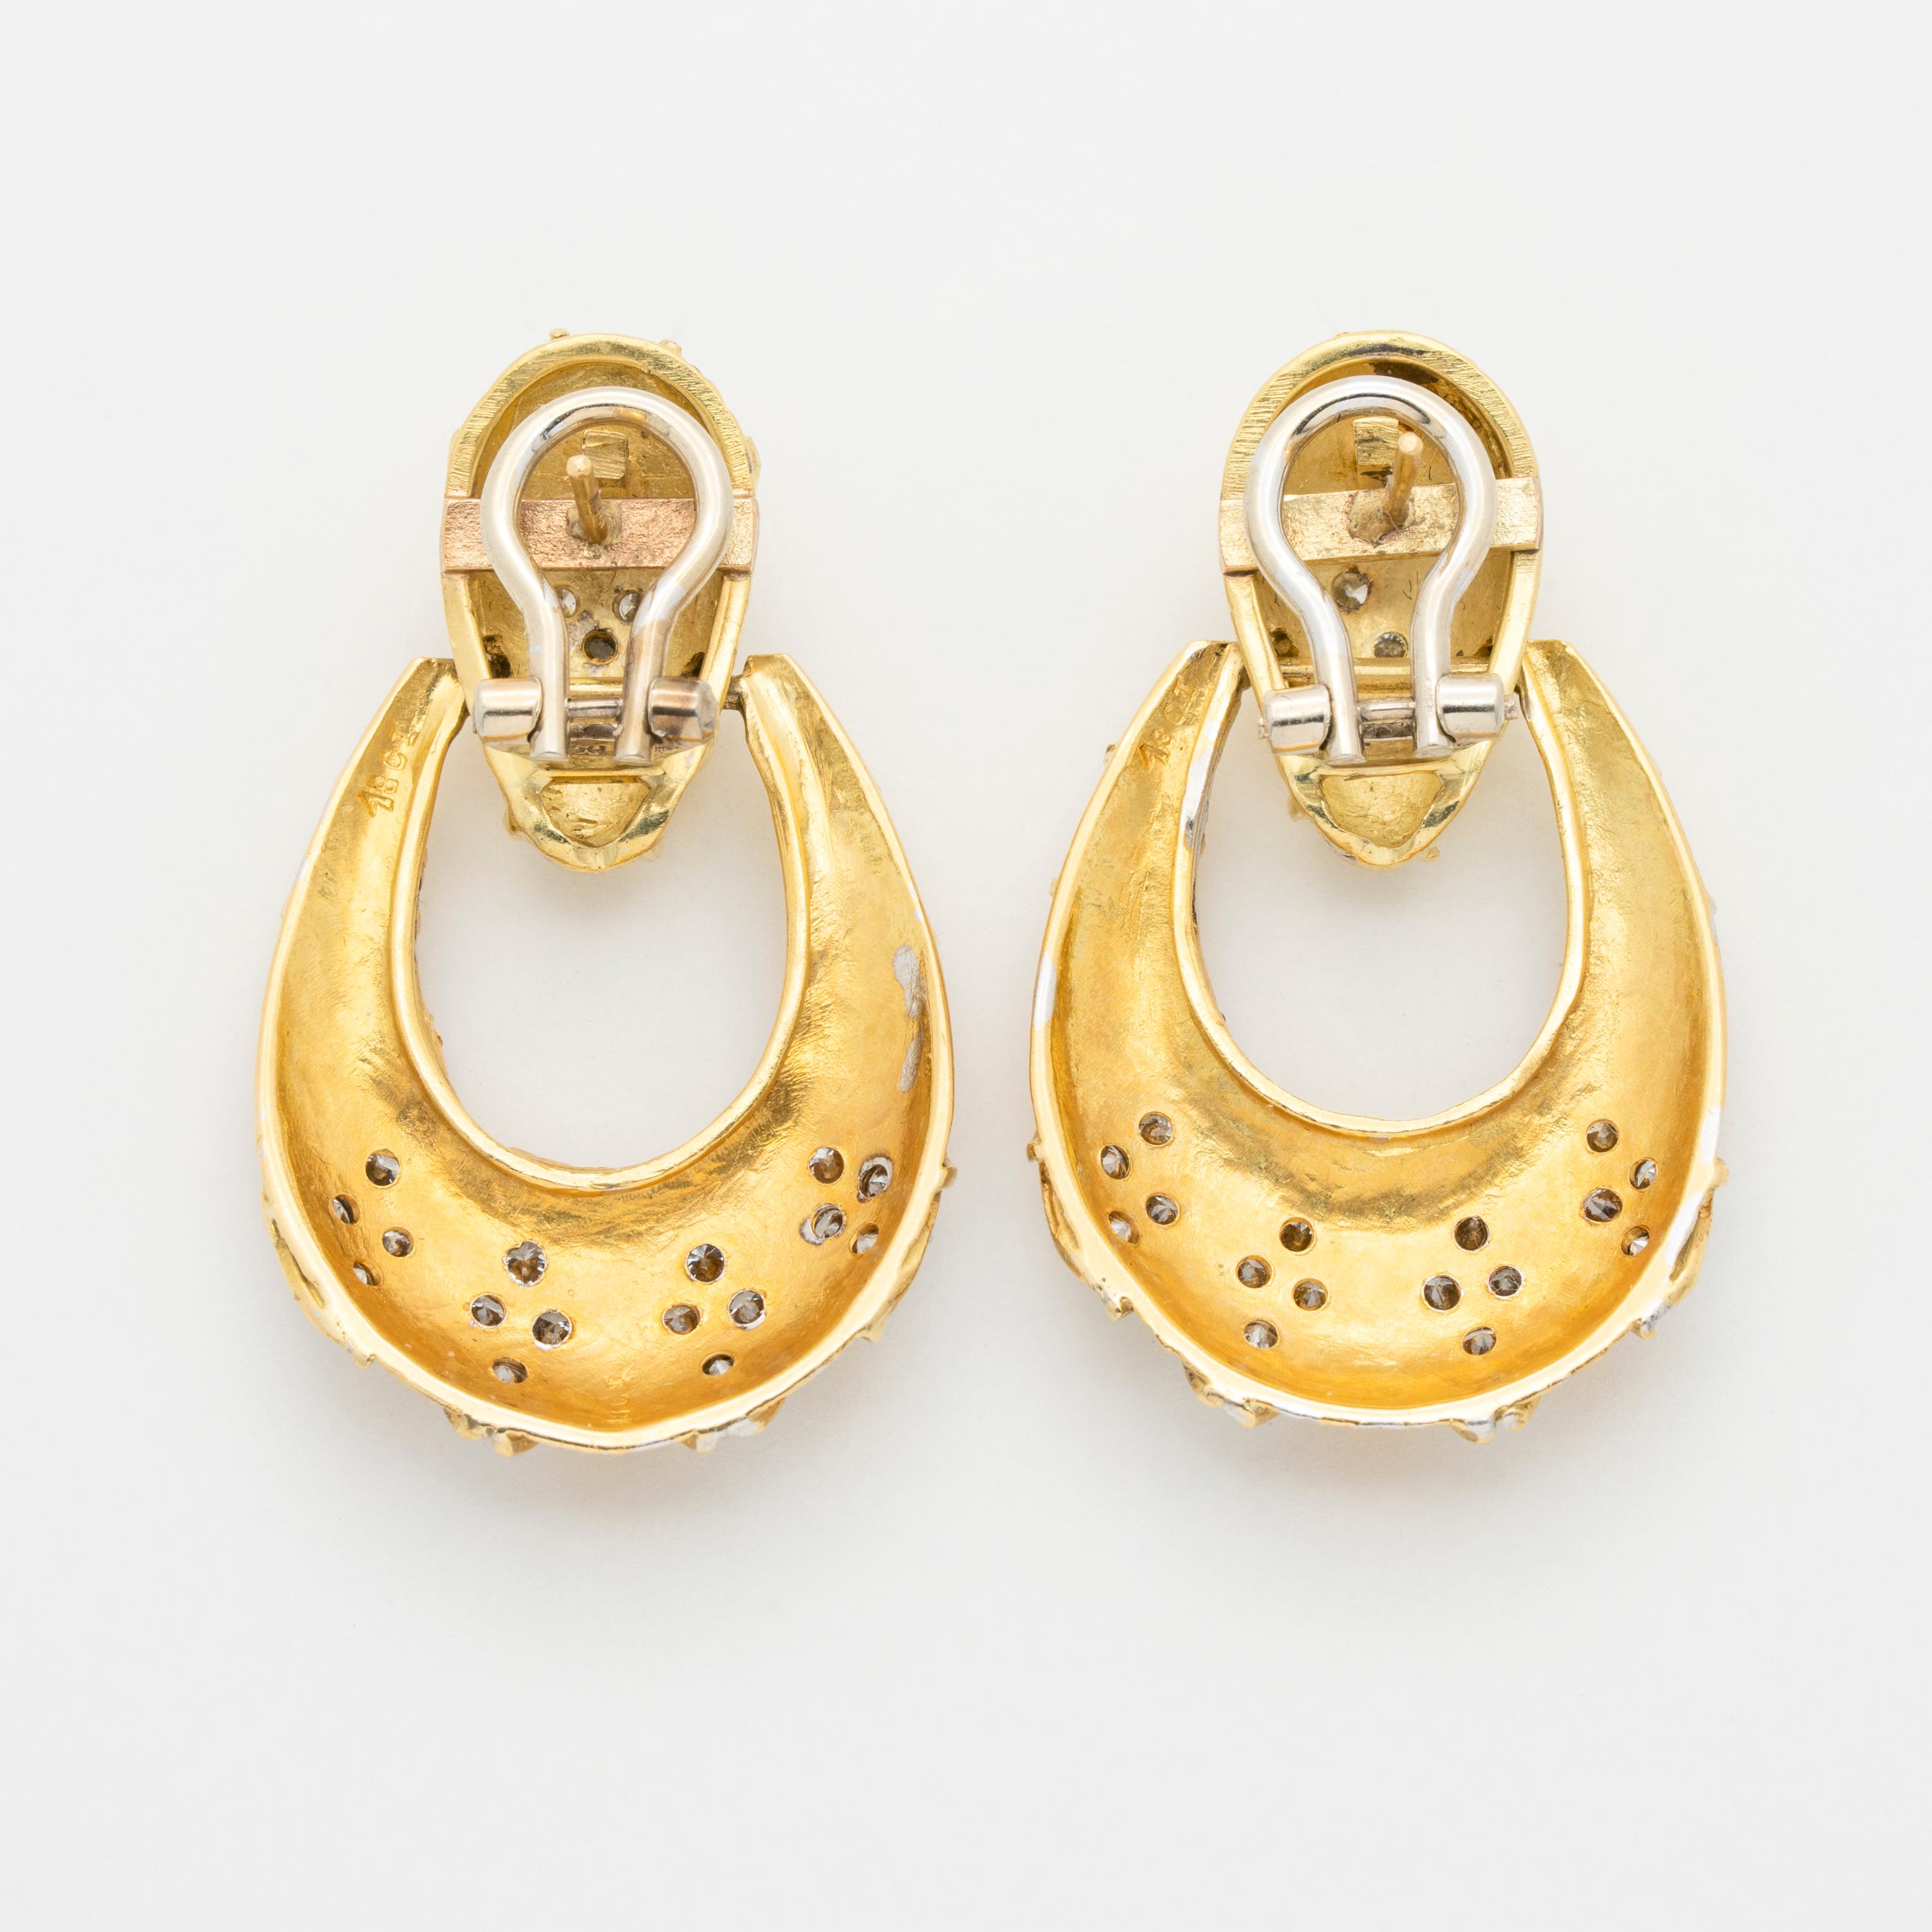 Vintage 18 Karat Yellow Gold and Diamond Door Knocker Earrings In Excellent Condition For Sale In New York, NY